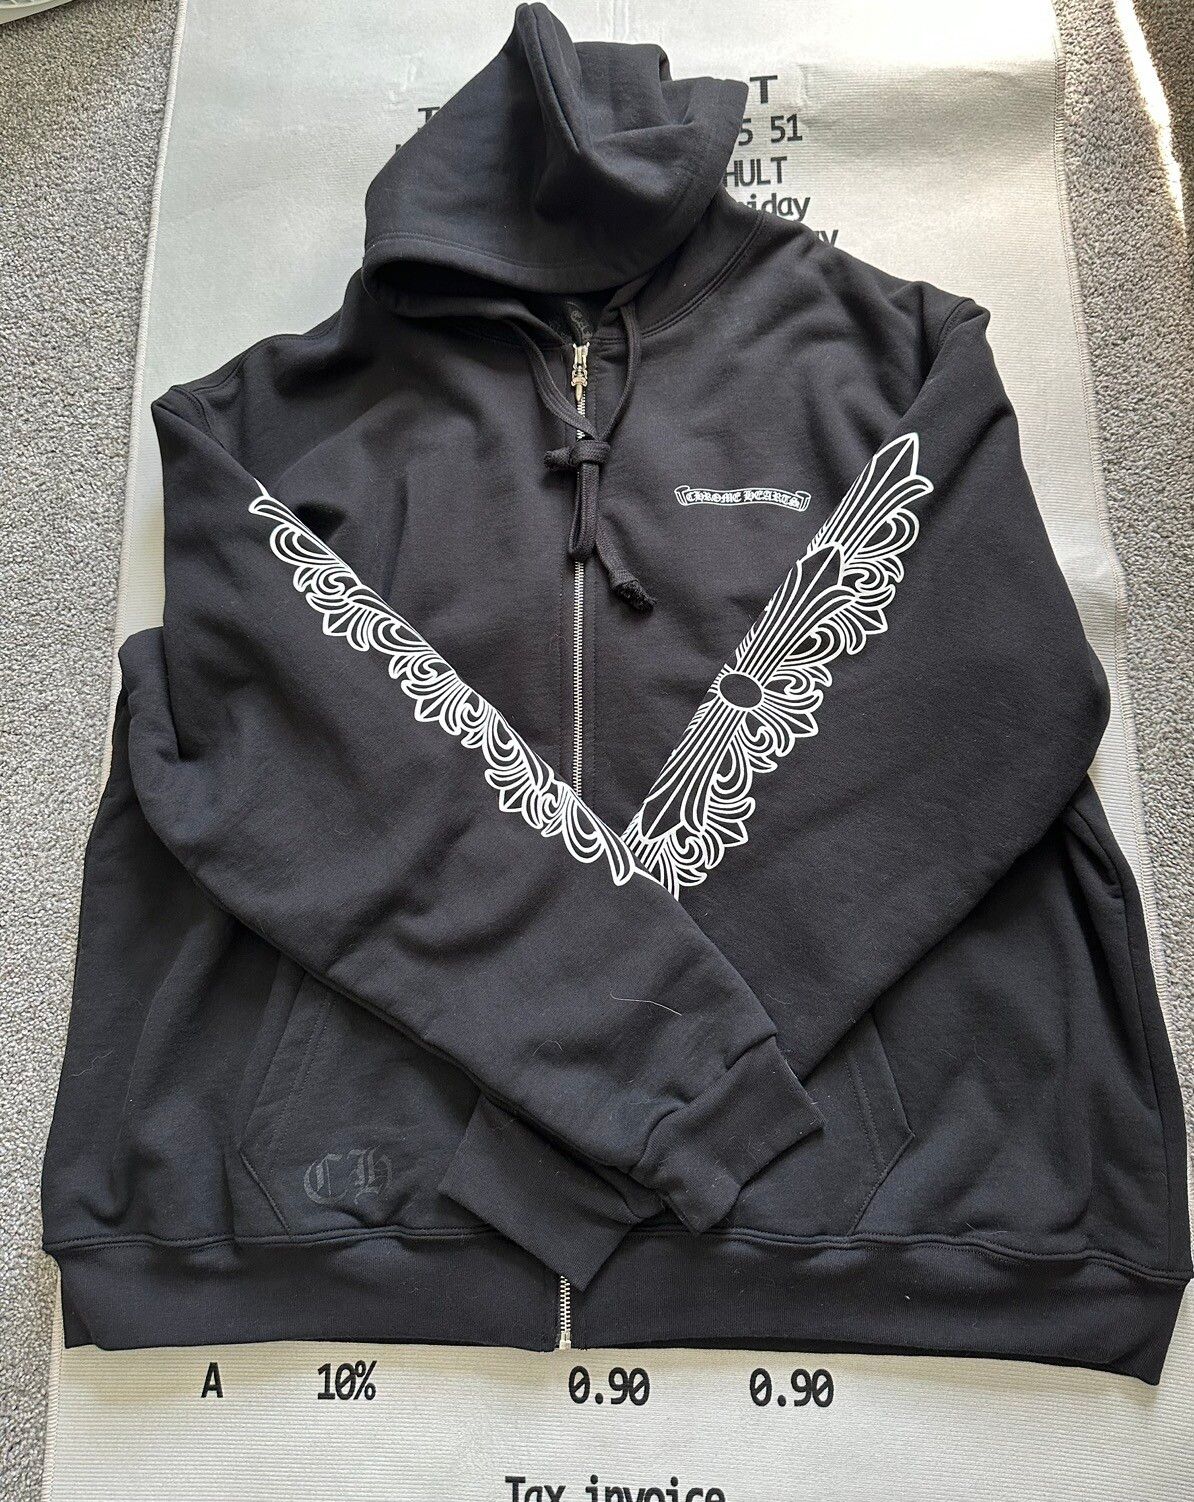 Chrome Hearts Chrome Hearts Aspen Exclusive Zip Up Hoodie | Grailed